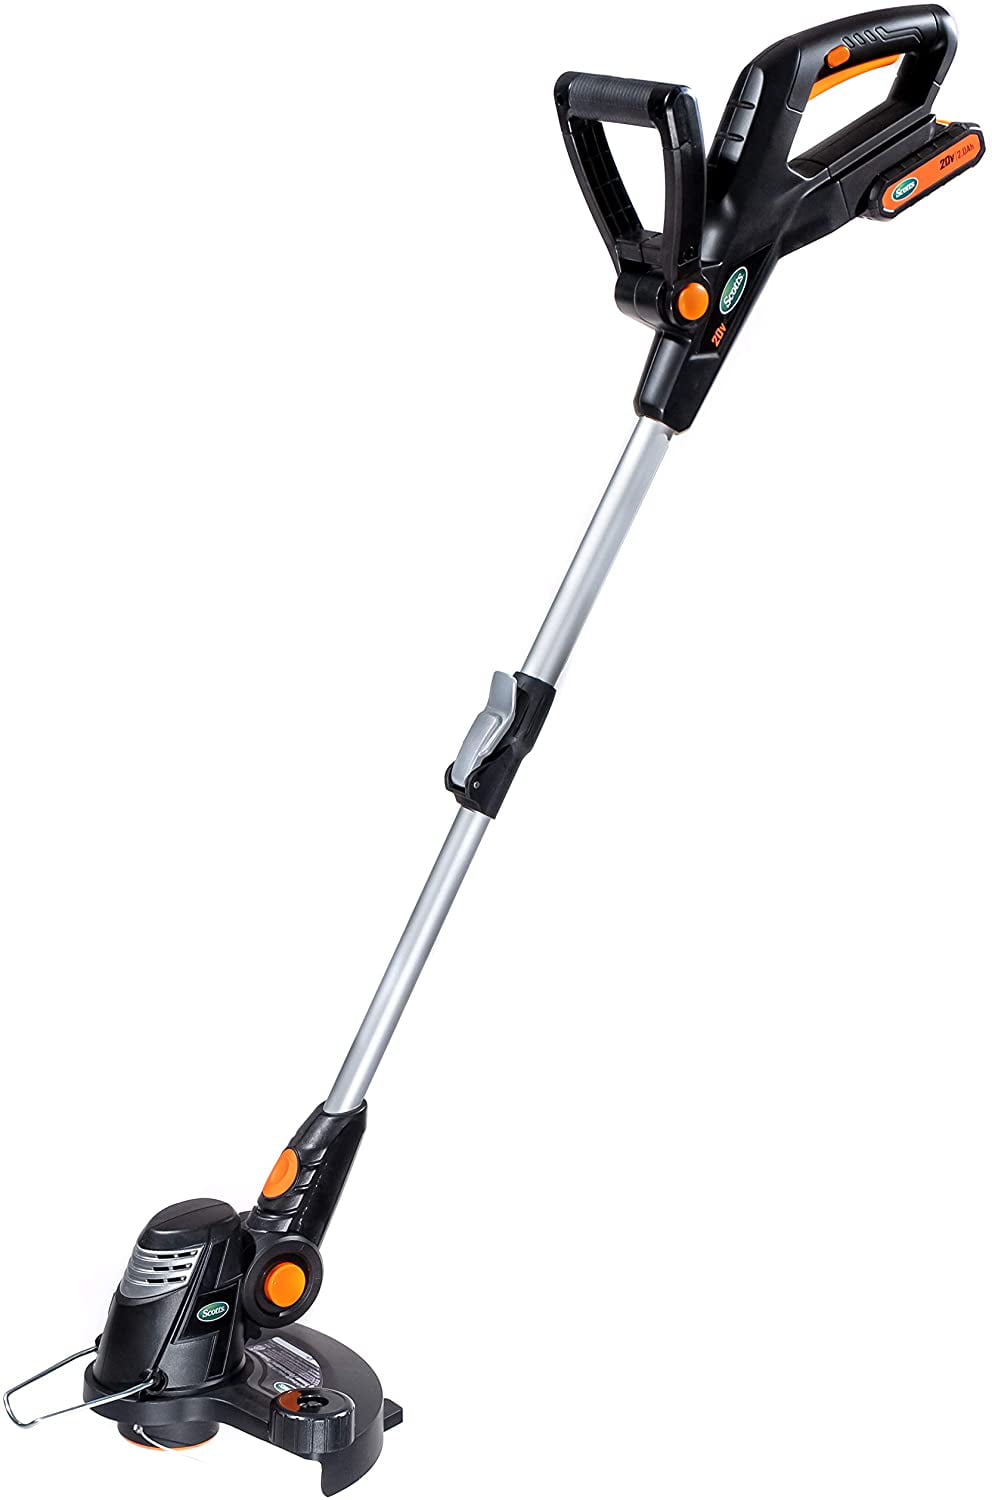 Scotts LST02012S 20-Volt 12-Inch Cordless String Trimmer, 2.0Ah Battery and Fast Charger Included